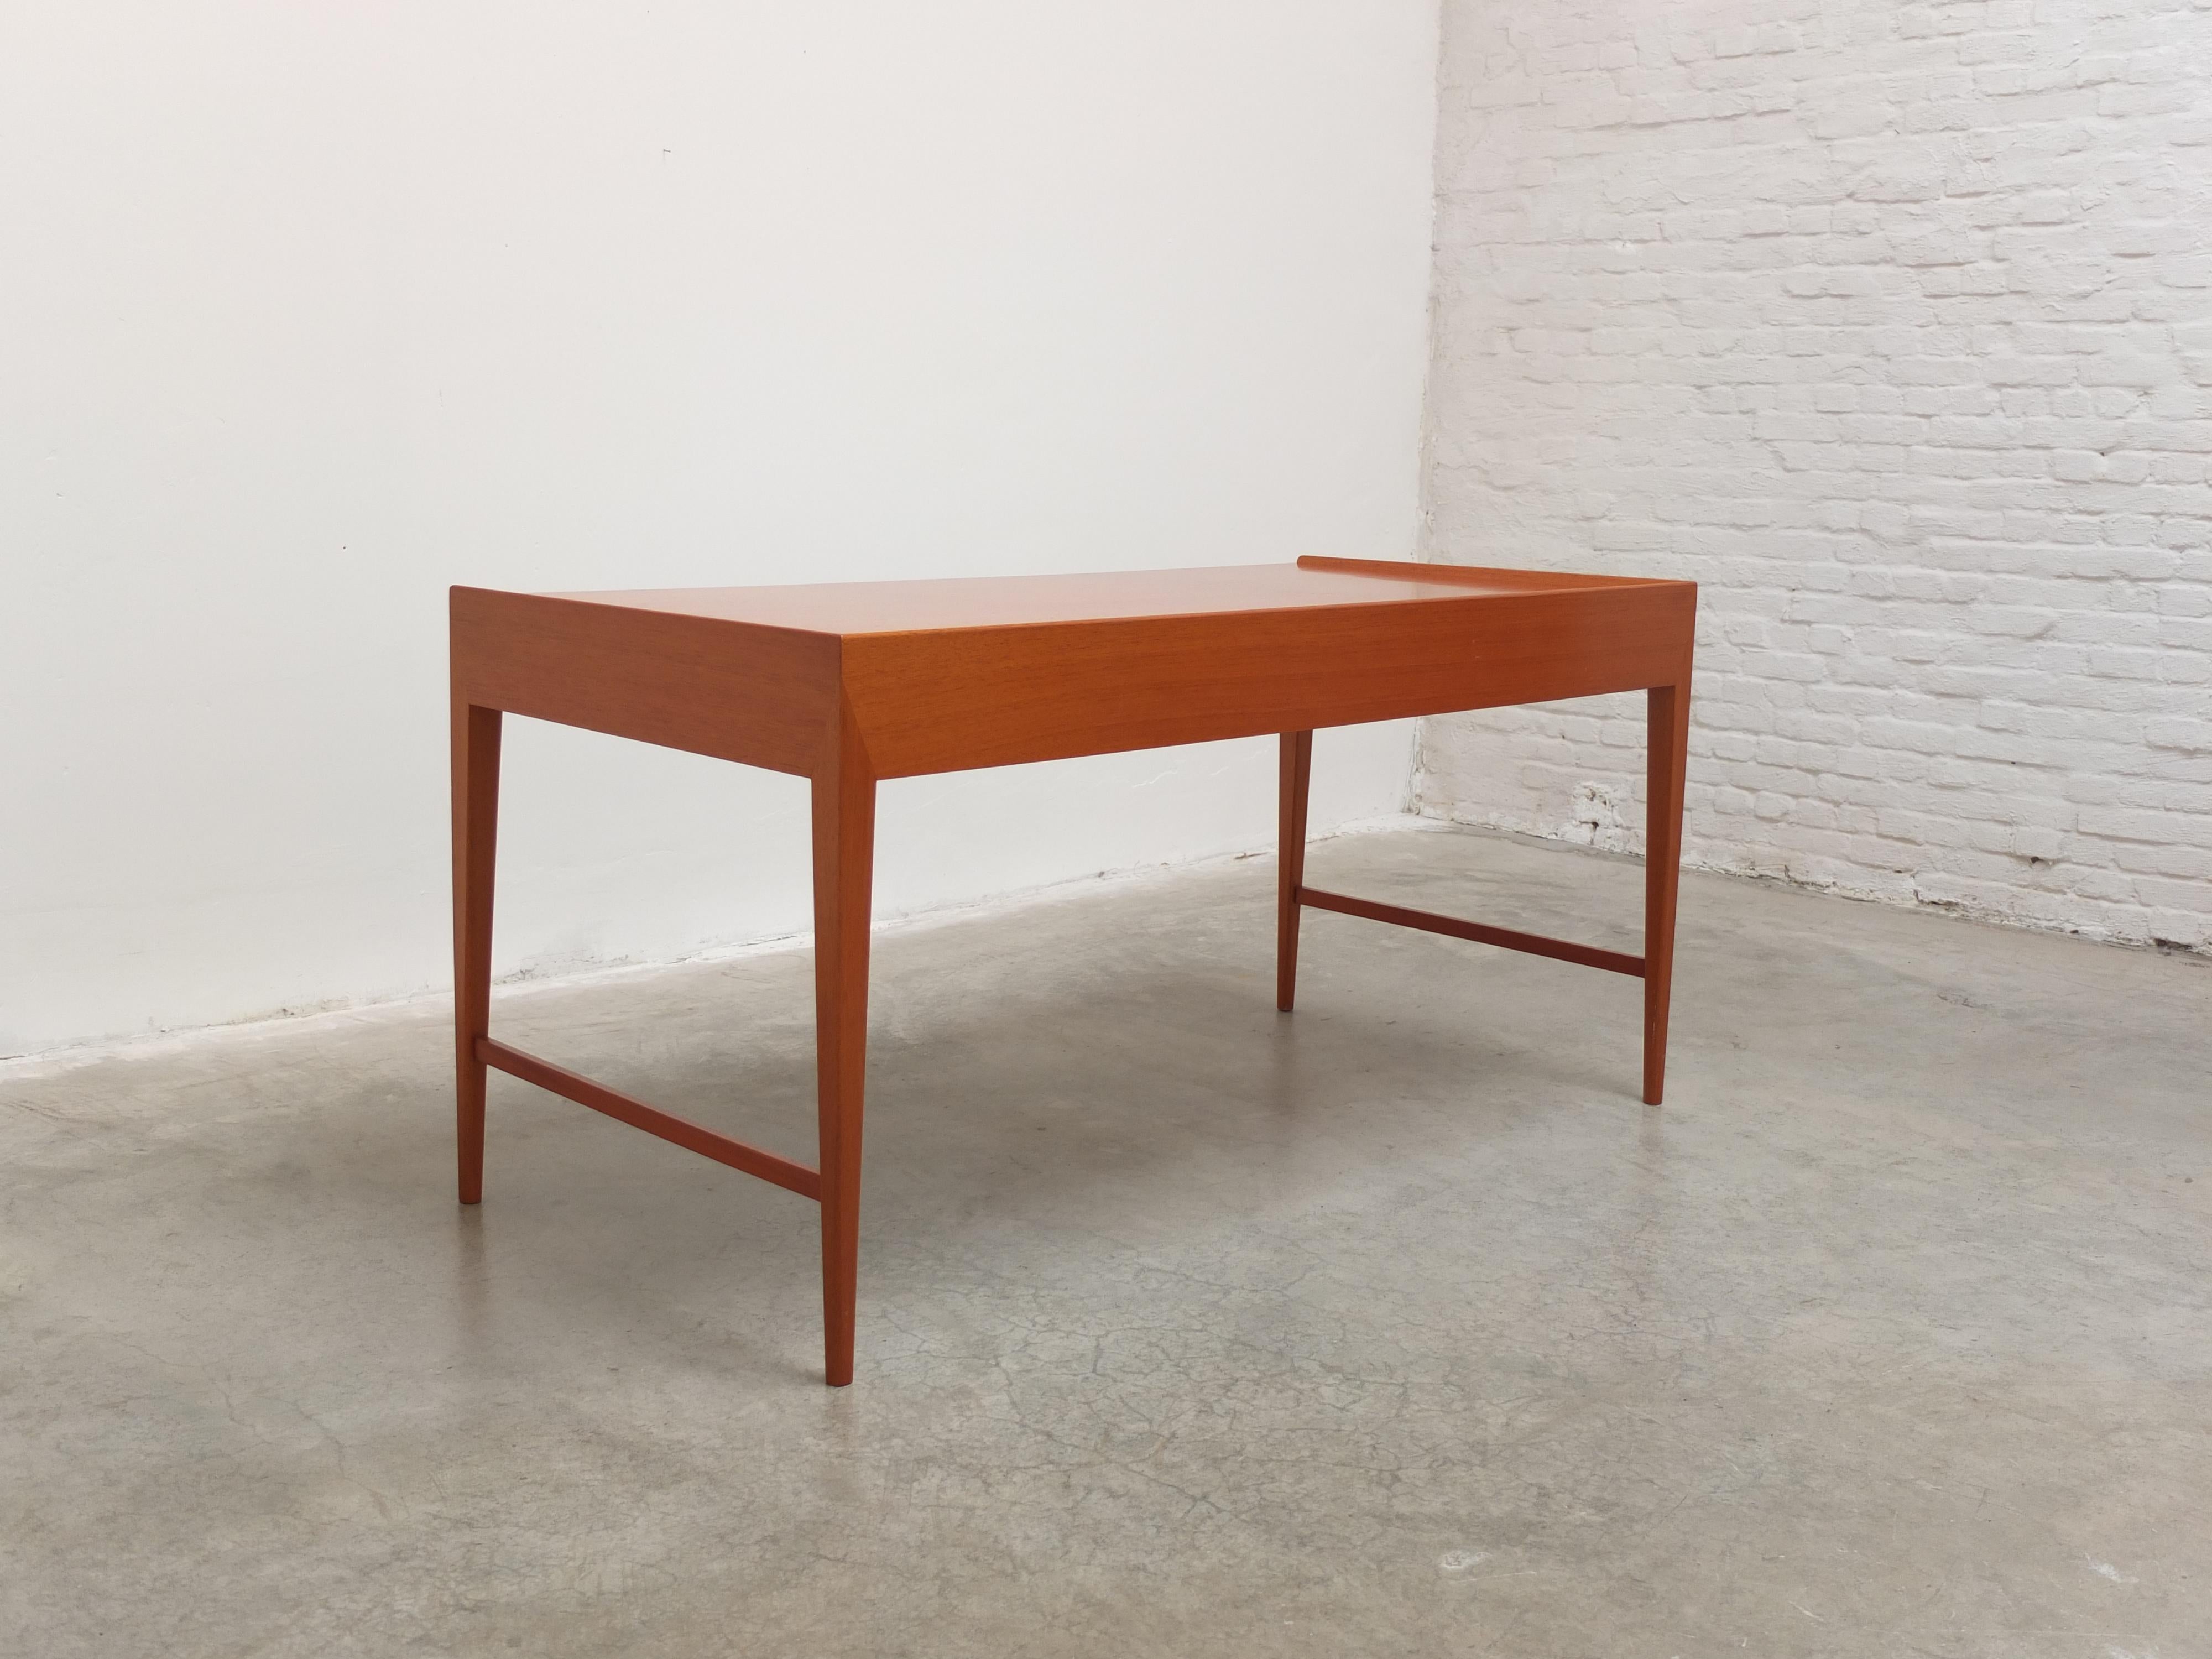 Rare Freestanding Desk by Frode Holm for Illums Bollighus, 1950s For Sale 10